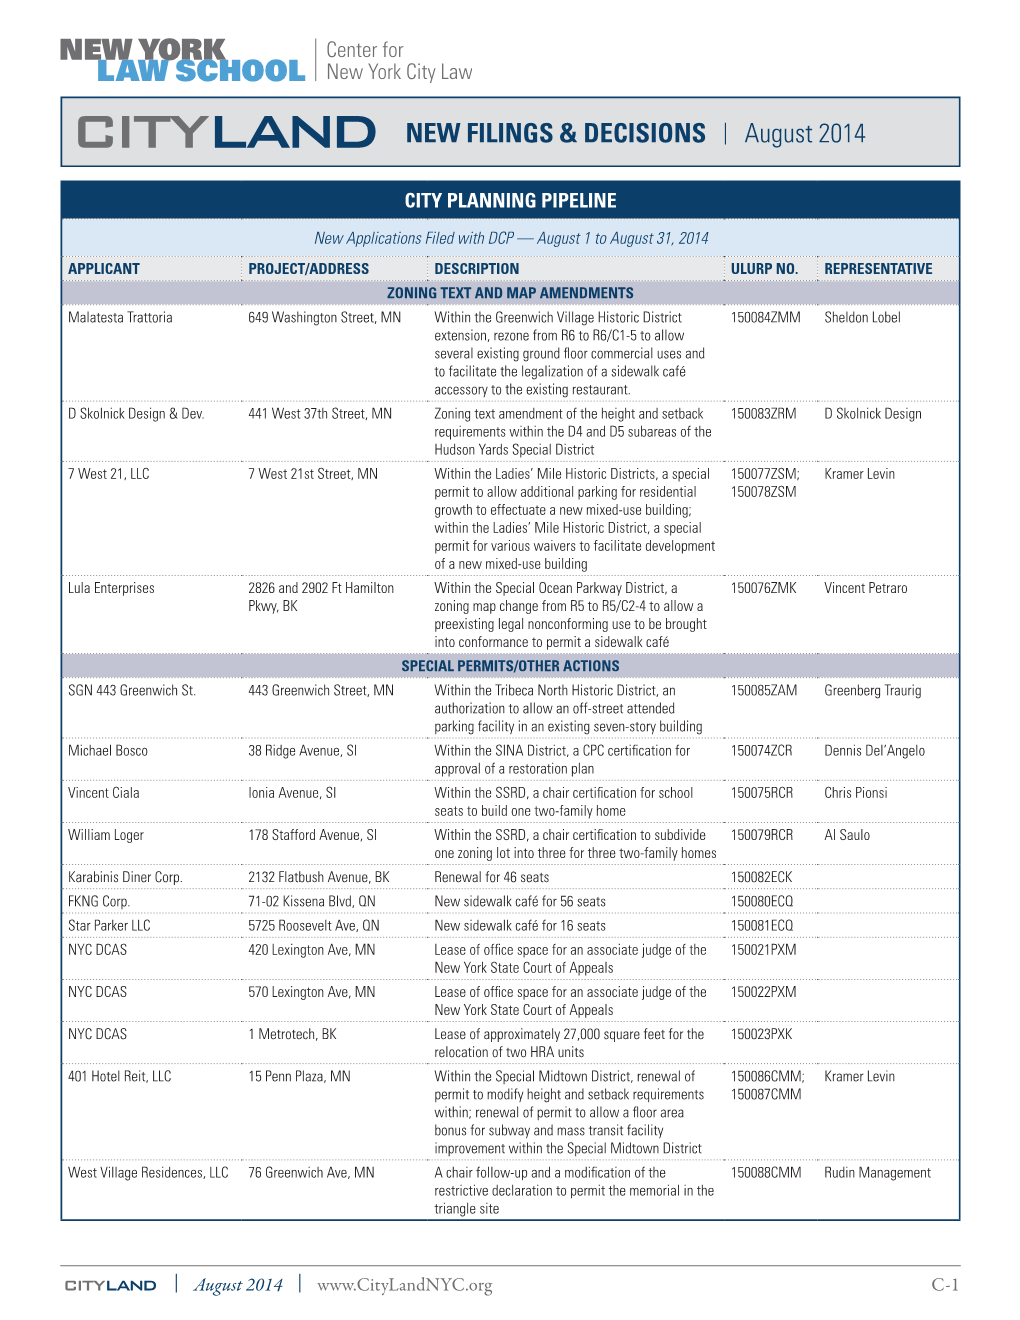 CITYLAND NEW FILINGS & DECISIONS | August 2014